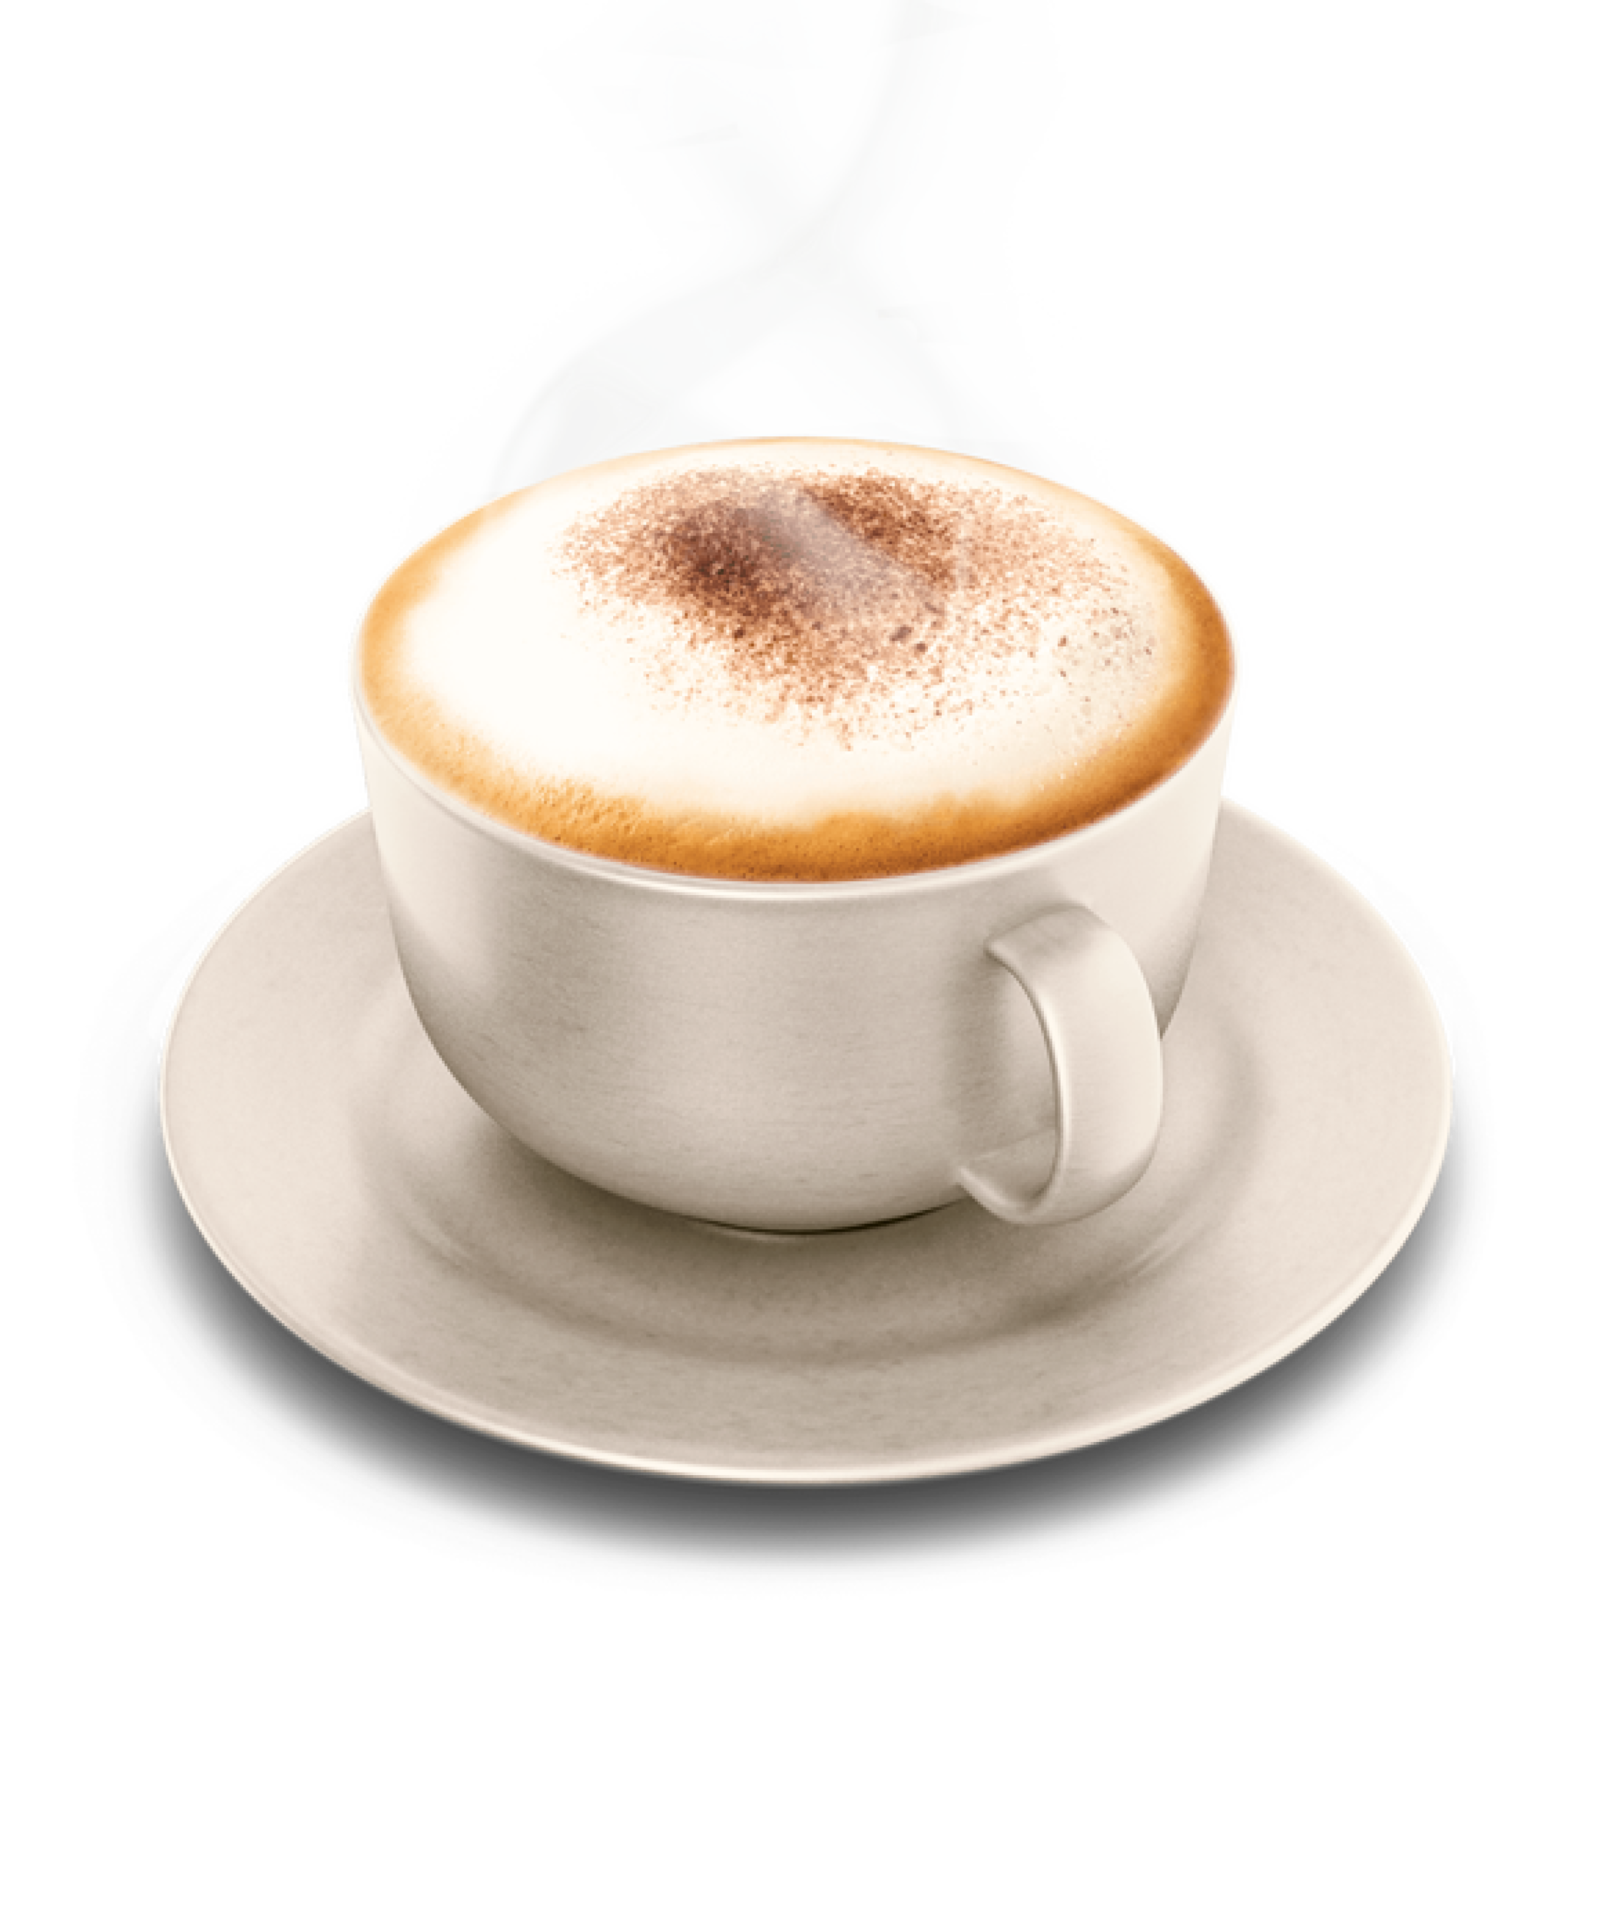 https://static.vecteezy.com/system/resources/previews/011/771/155/original/cup-of-cappuccino-png.png